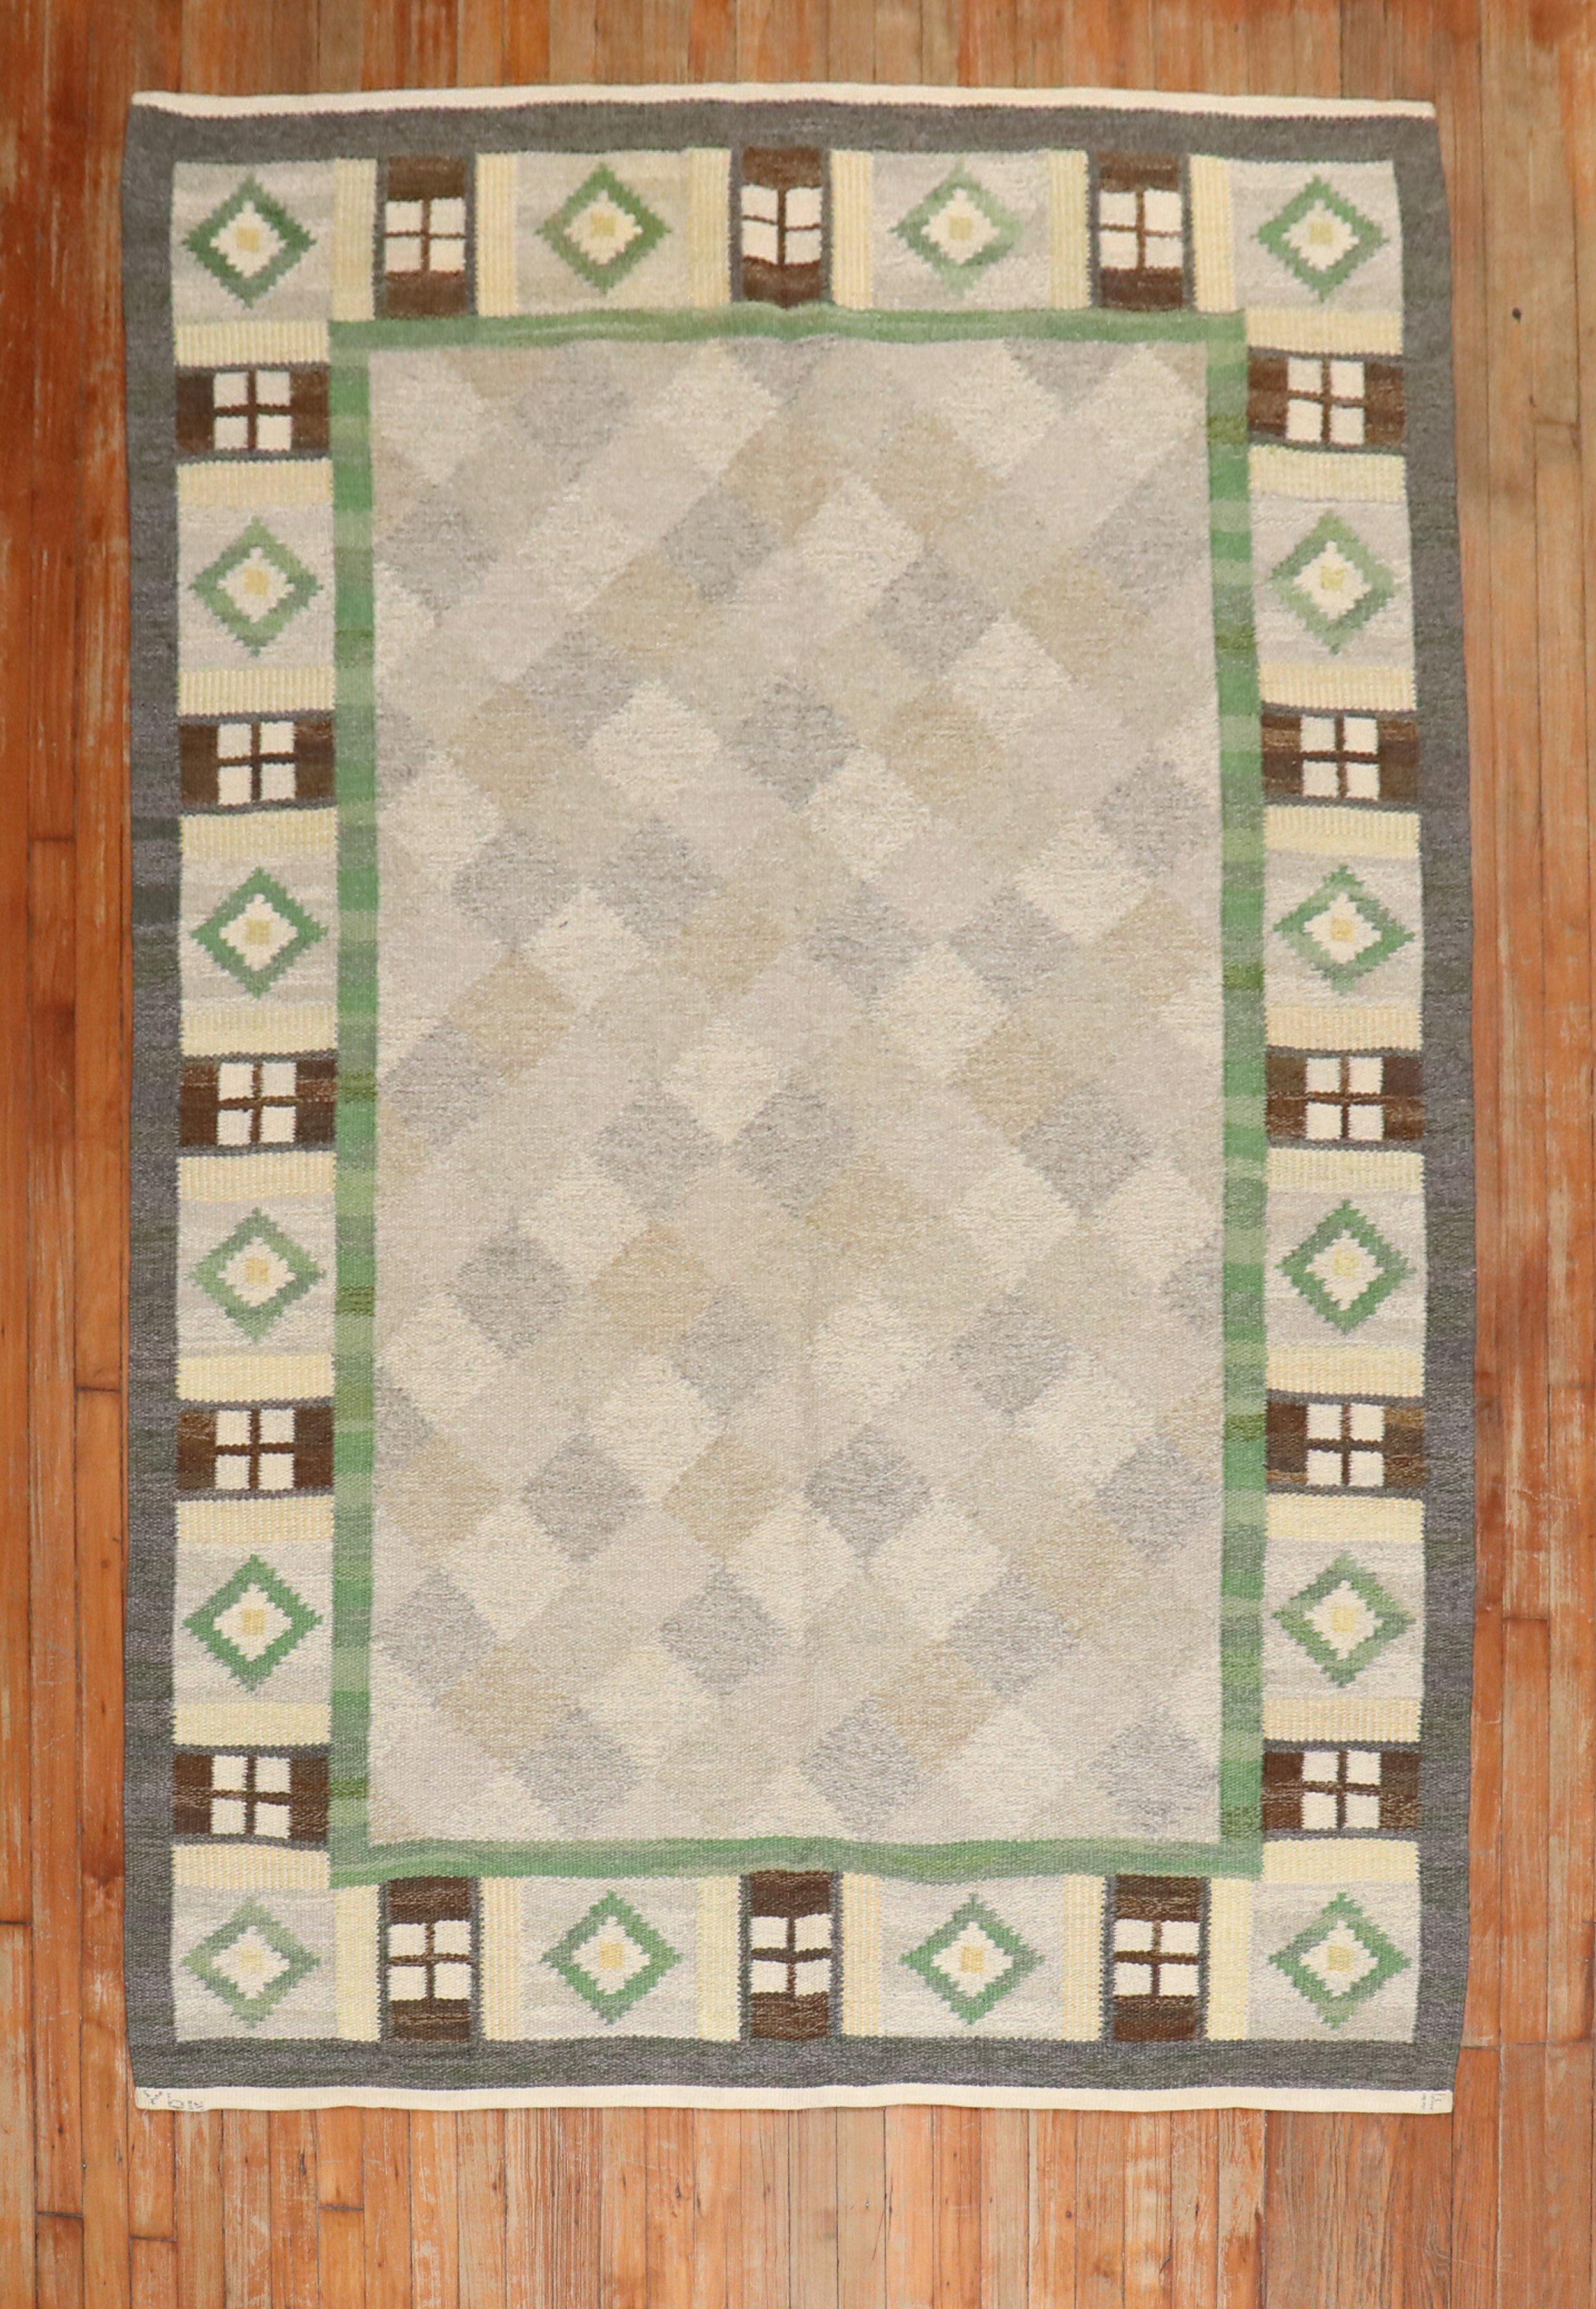 Swedish flatweave carpet from the middle of the 20th century.

Measures: 5'4'' x 8'.